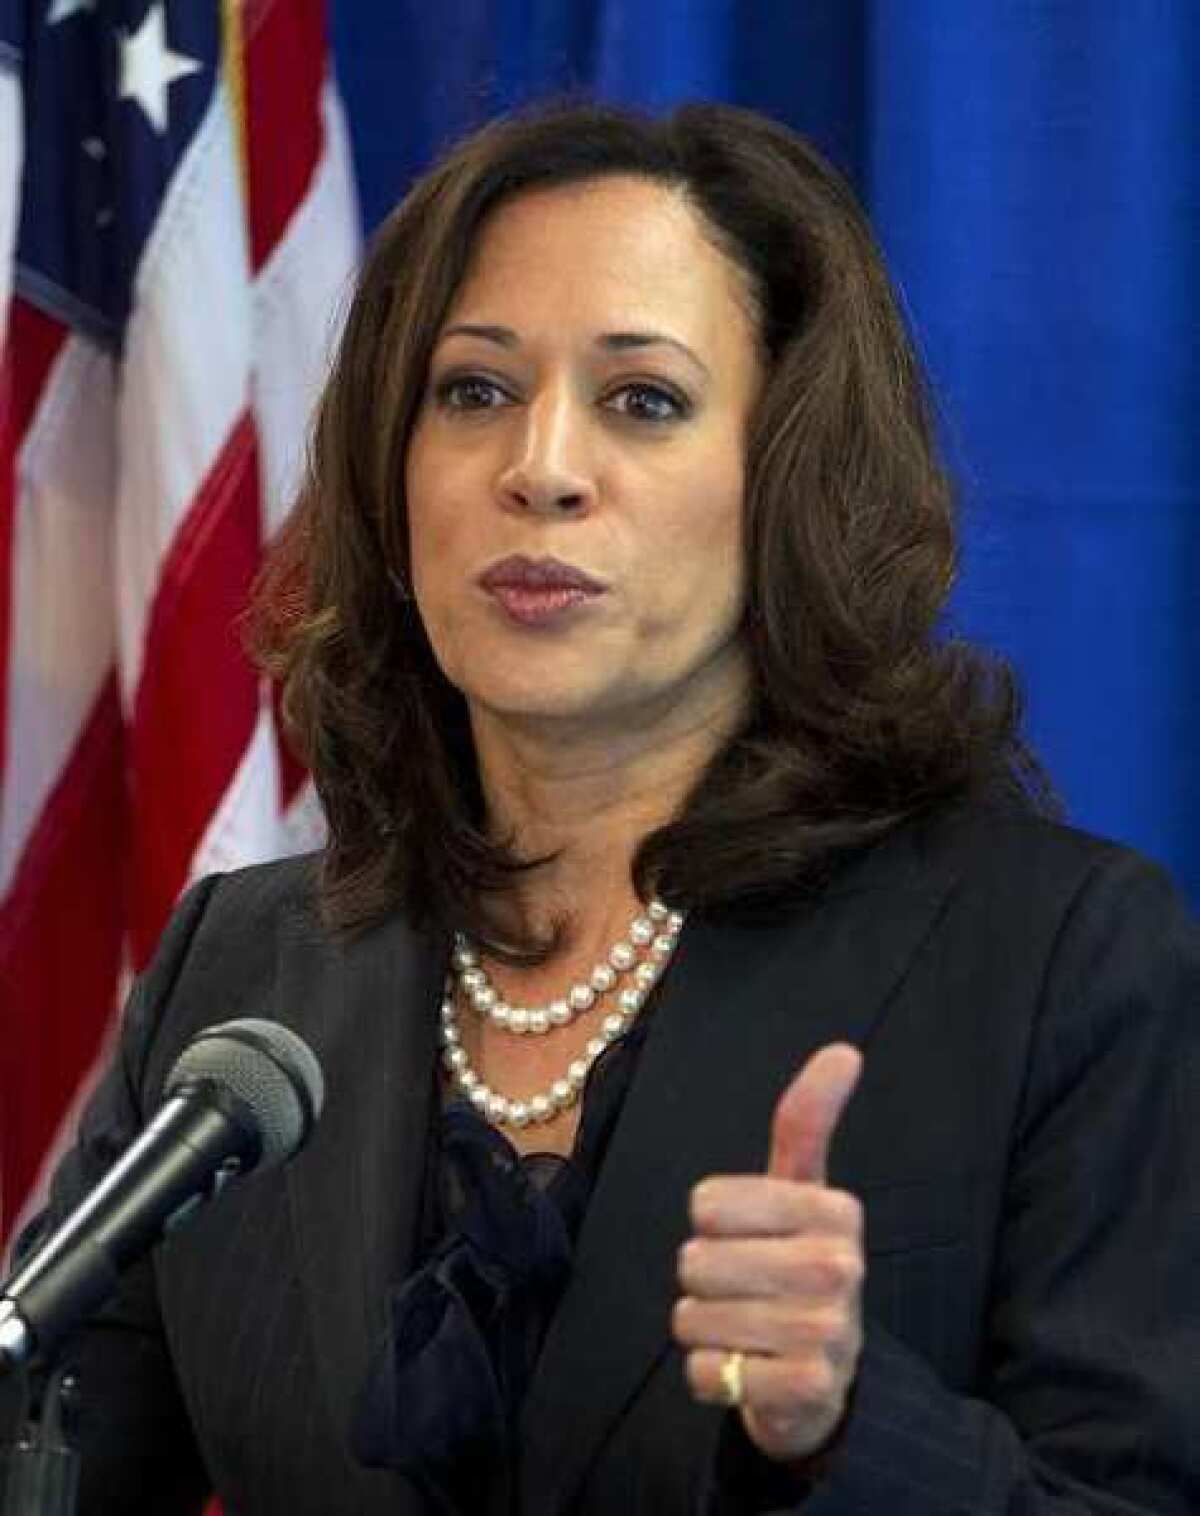 California Atty. Gen. Kamala Harris reports that 2.5 million Californians lost personal information from 131 digital data breaches in 2012.